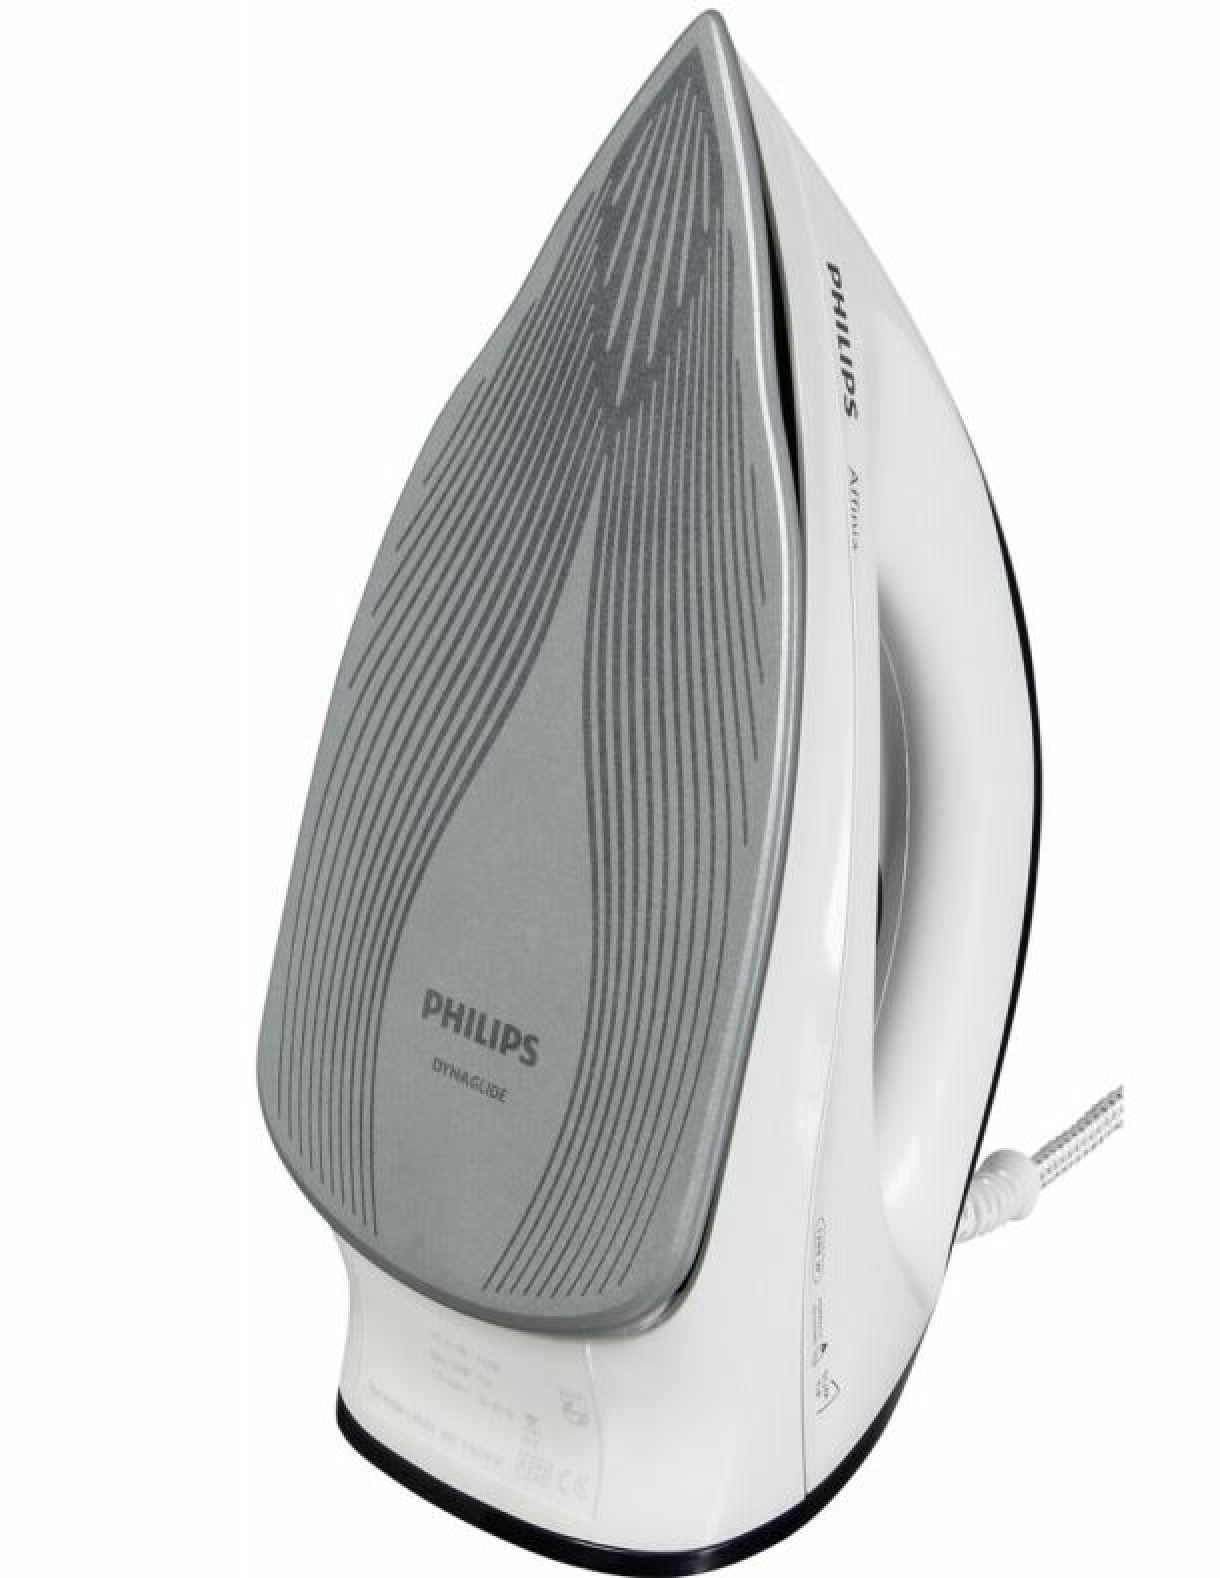 Philips GC 160 Used A Dry Iron 1200 Watts